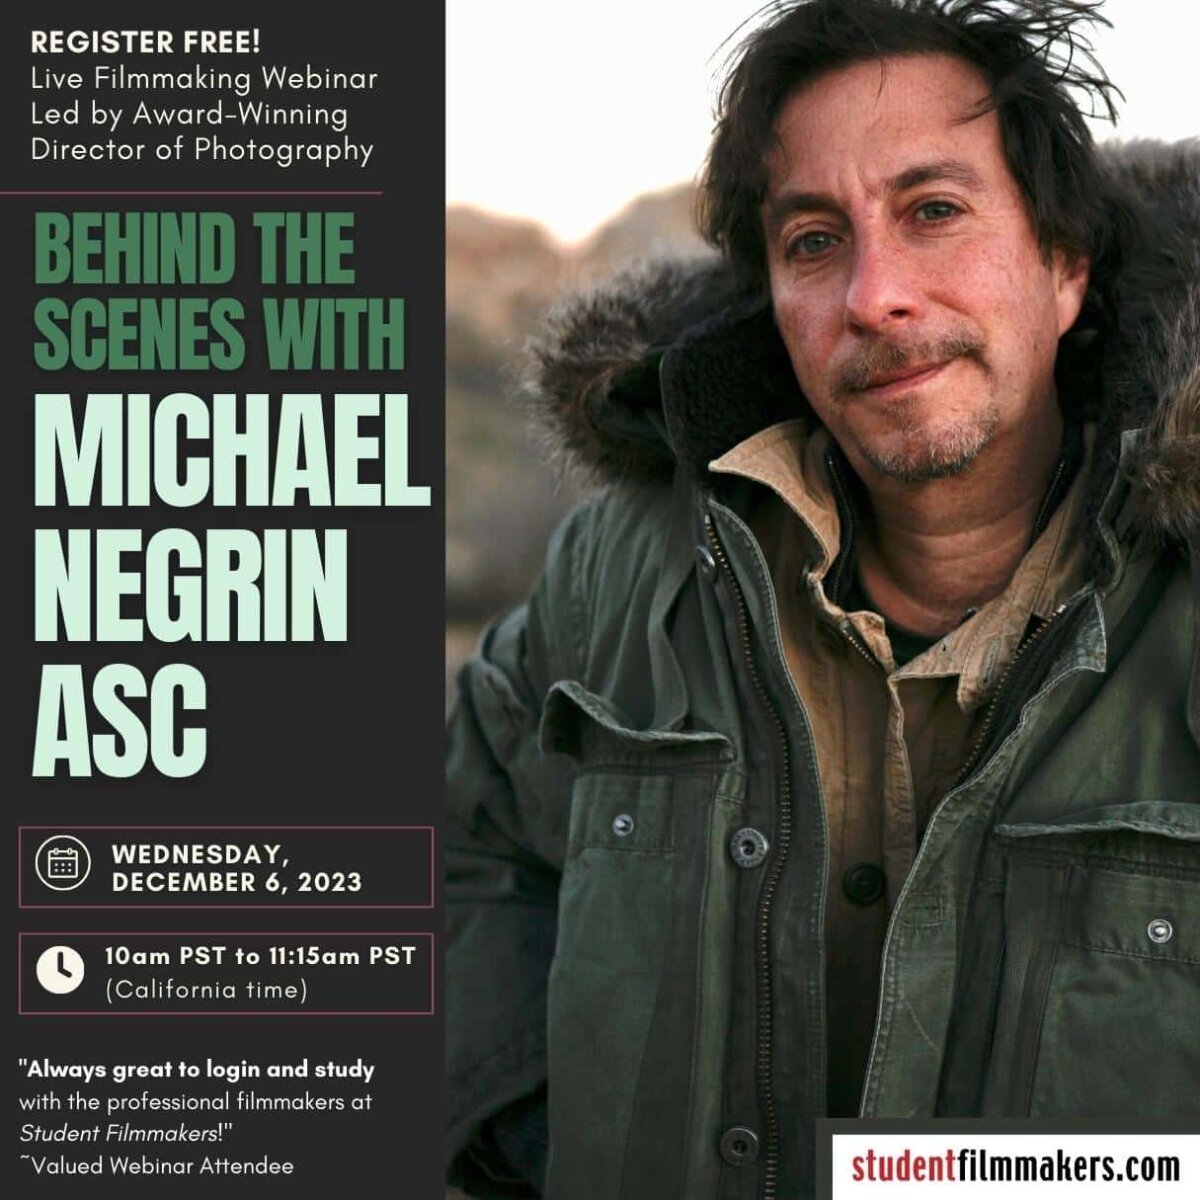 REGISTER FREE! Live Webinar, Behind the Scenes with Michael Negrin ASC, Award-Winning Director of Photography